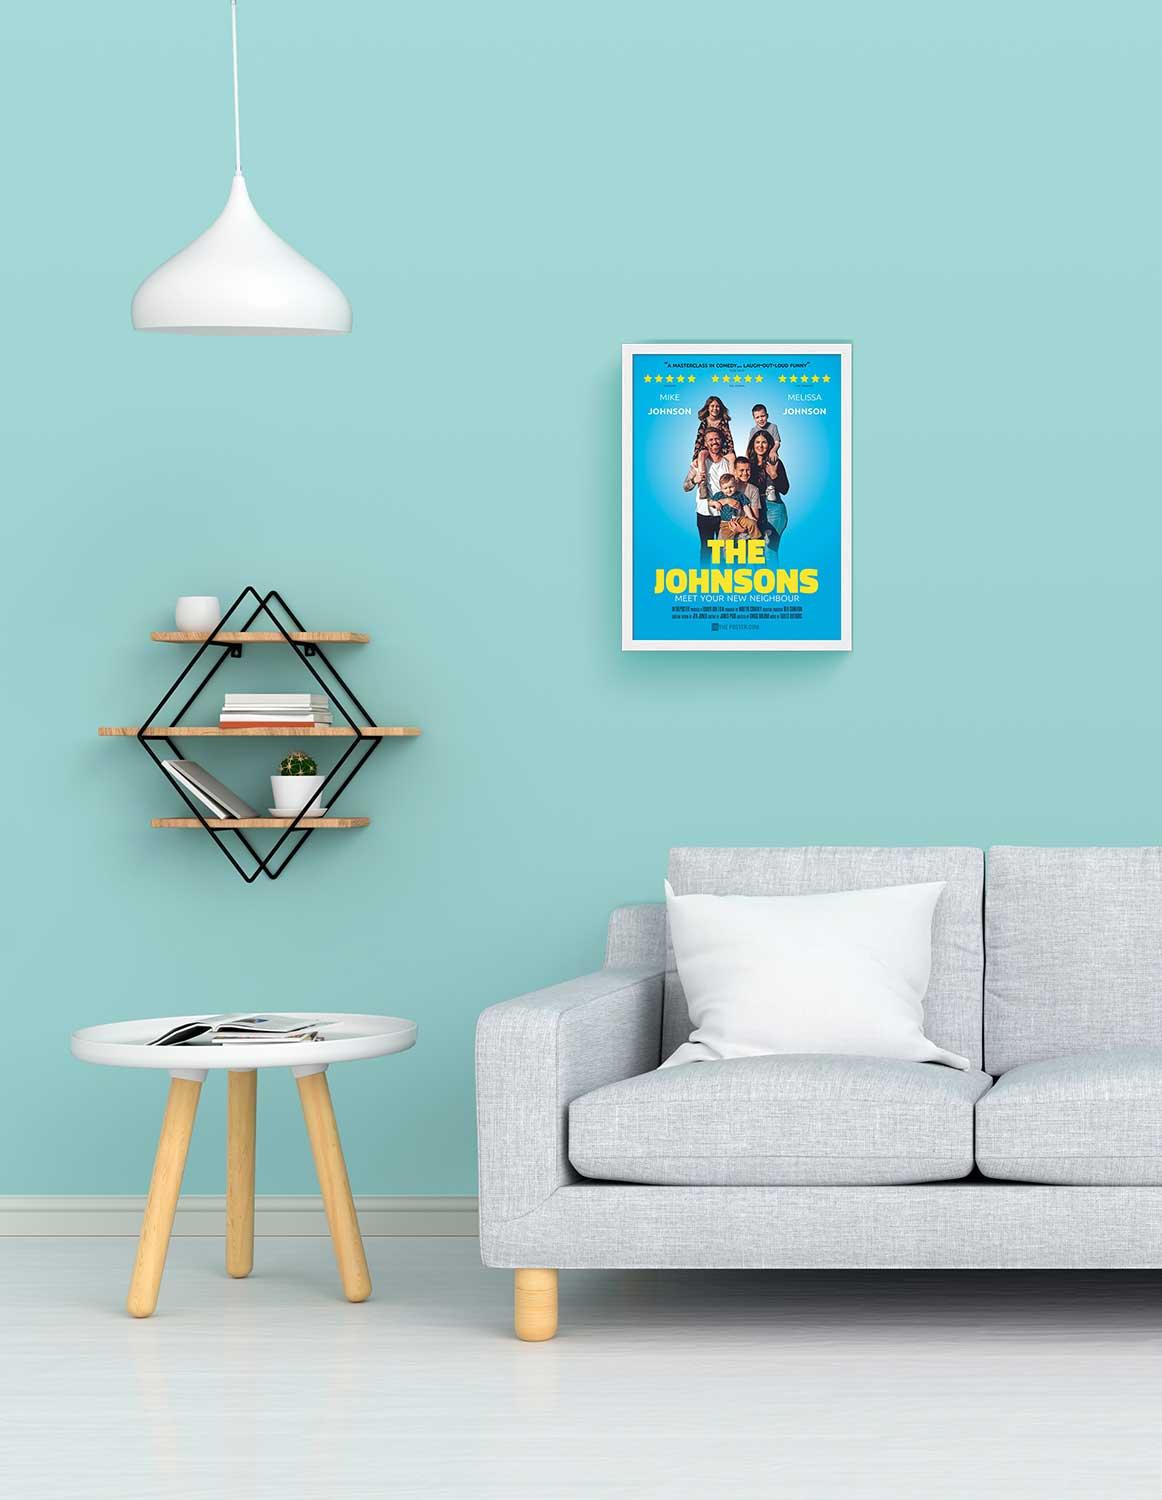 A comedy poster in a small size white frame on the wall above a grey sofa